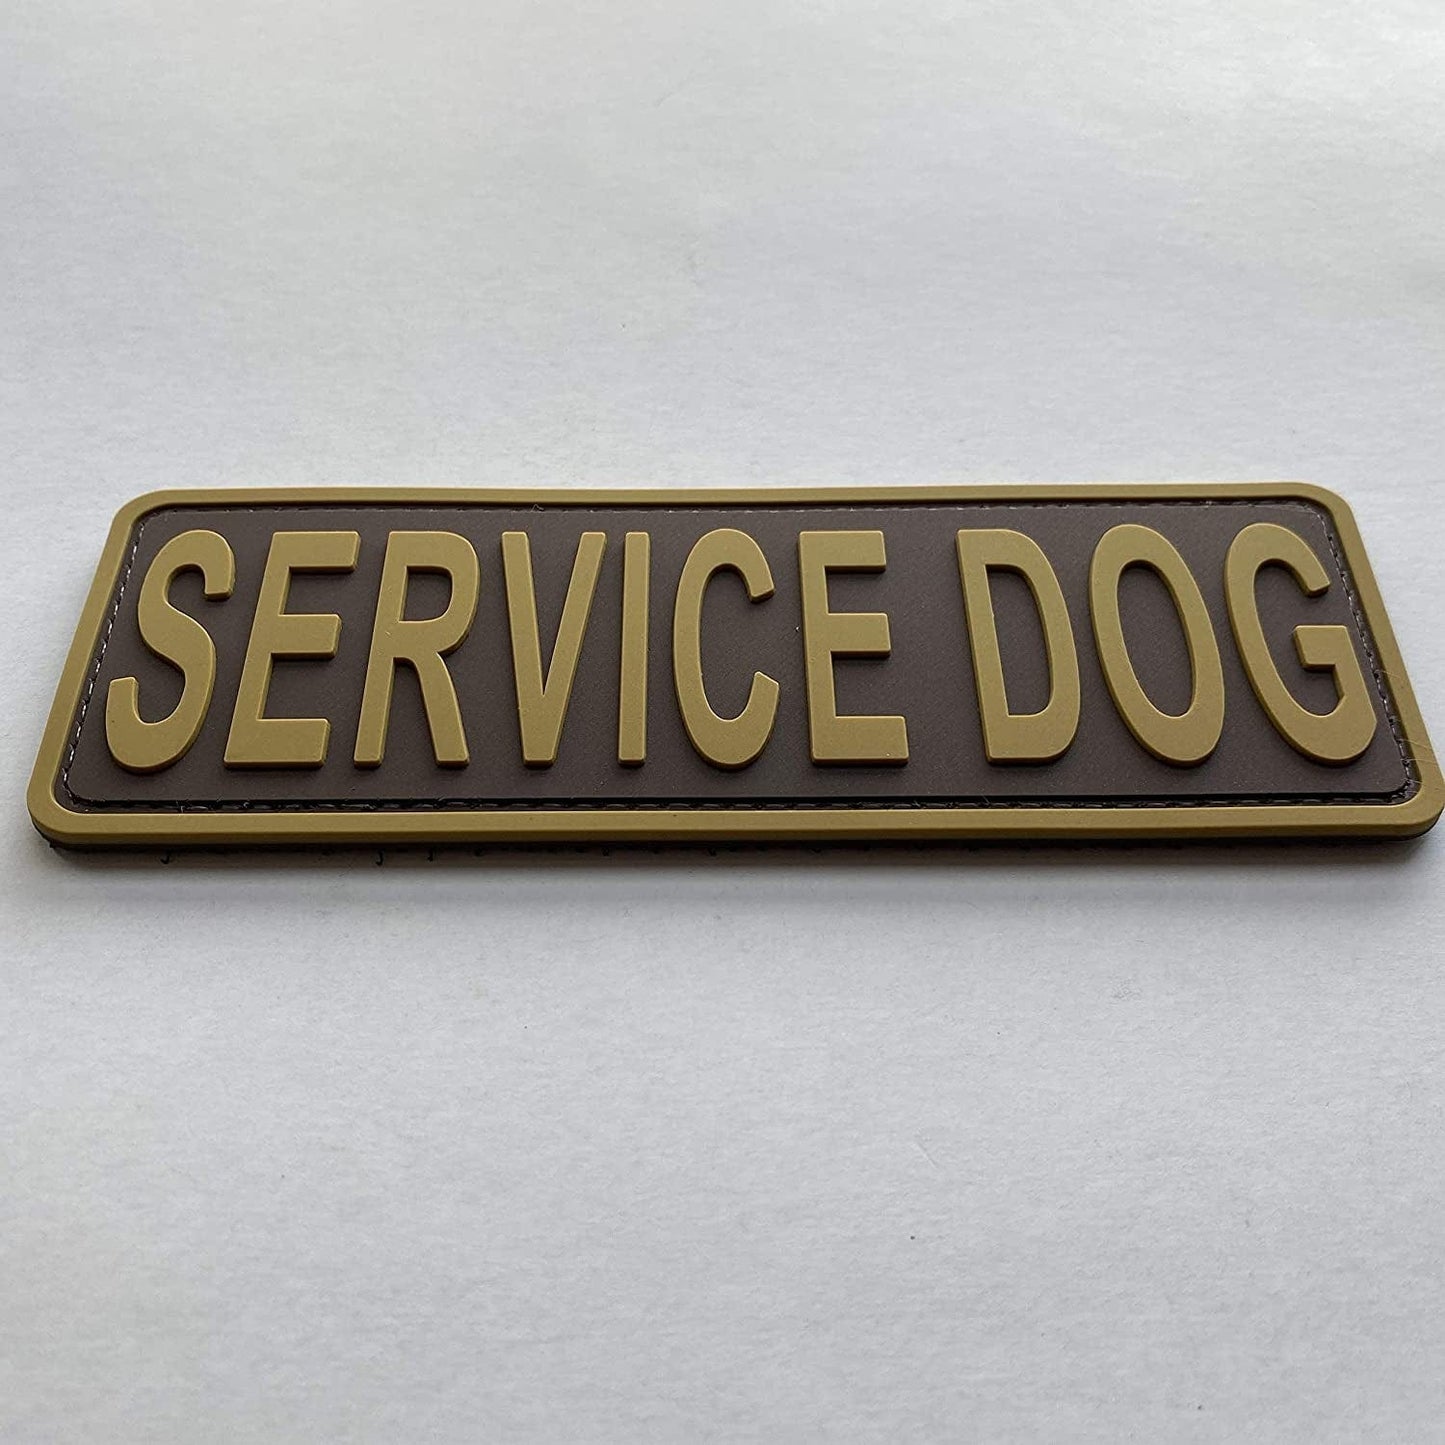 Uuken Service Dog Patch 6X2 Inches Coyote Tan Hook Back K9 Working Dog in Training PVC Military Tactical for Tactical Vest Harness K9 Collar (Coyote Tan, 6"X2") Animals & Pet Supplies > Pet Supplies > Dog Supplies > Dog Apparel uuKen   